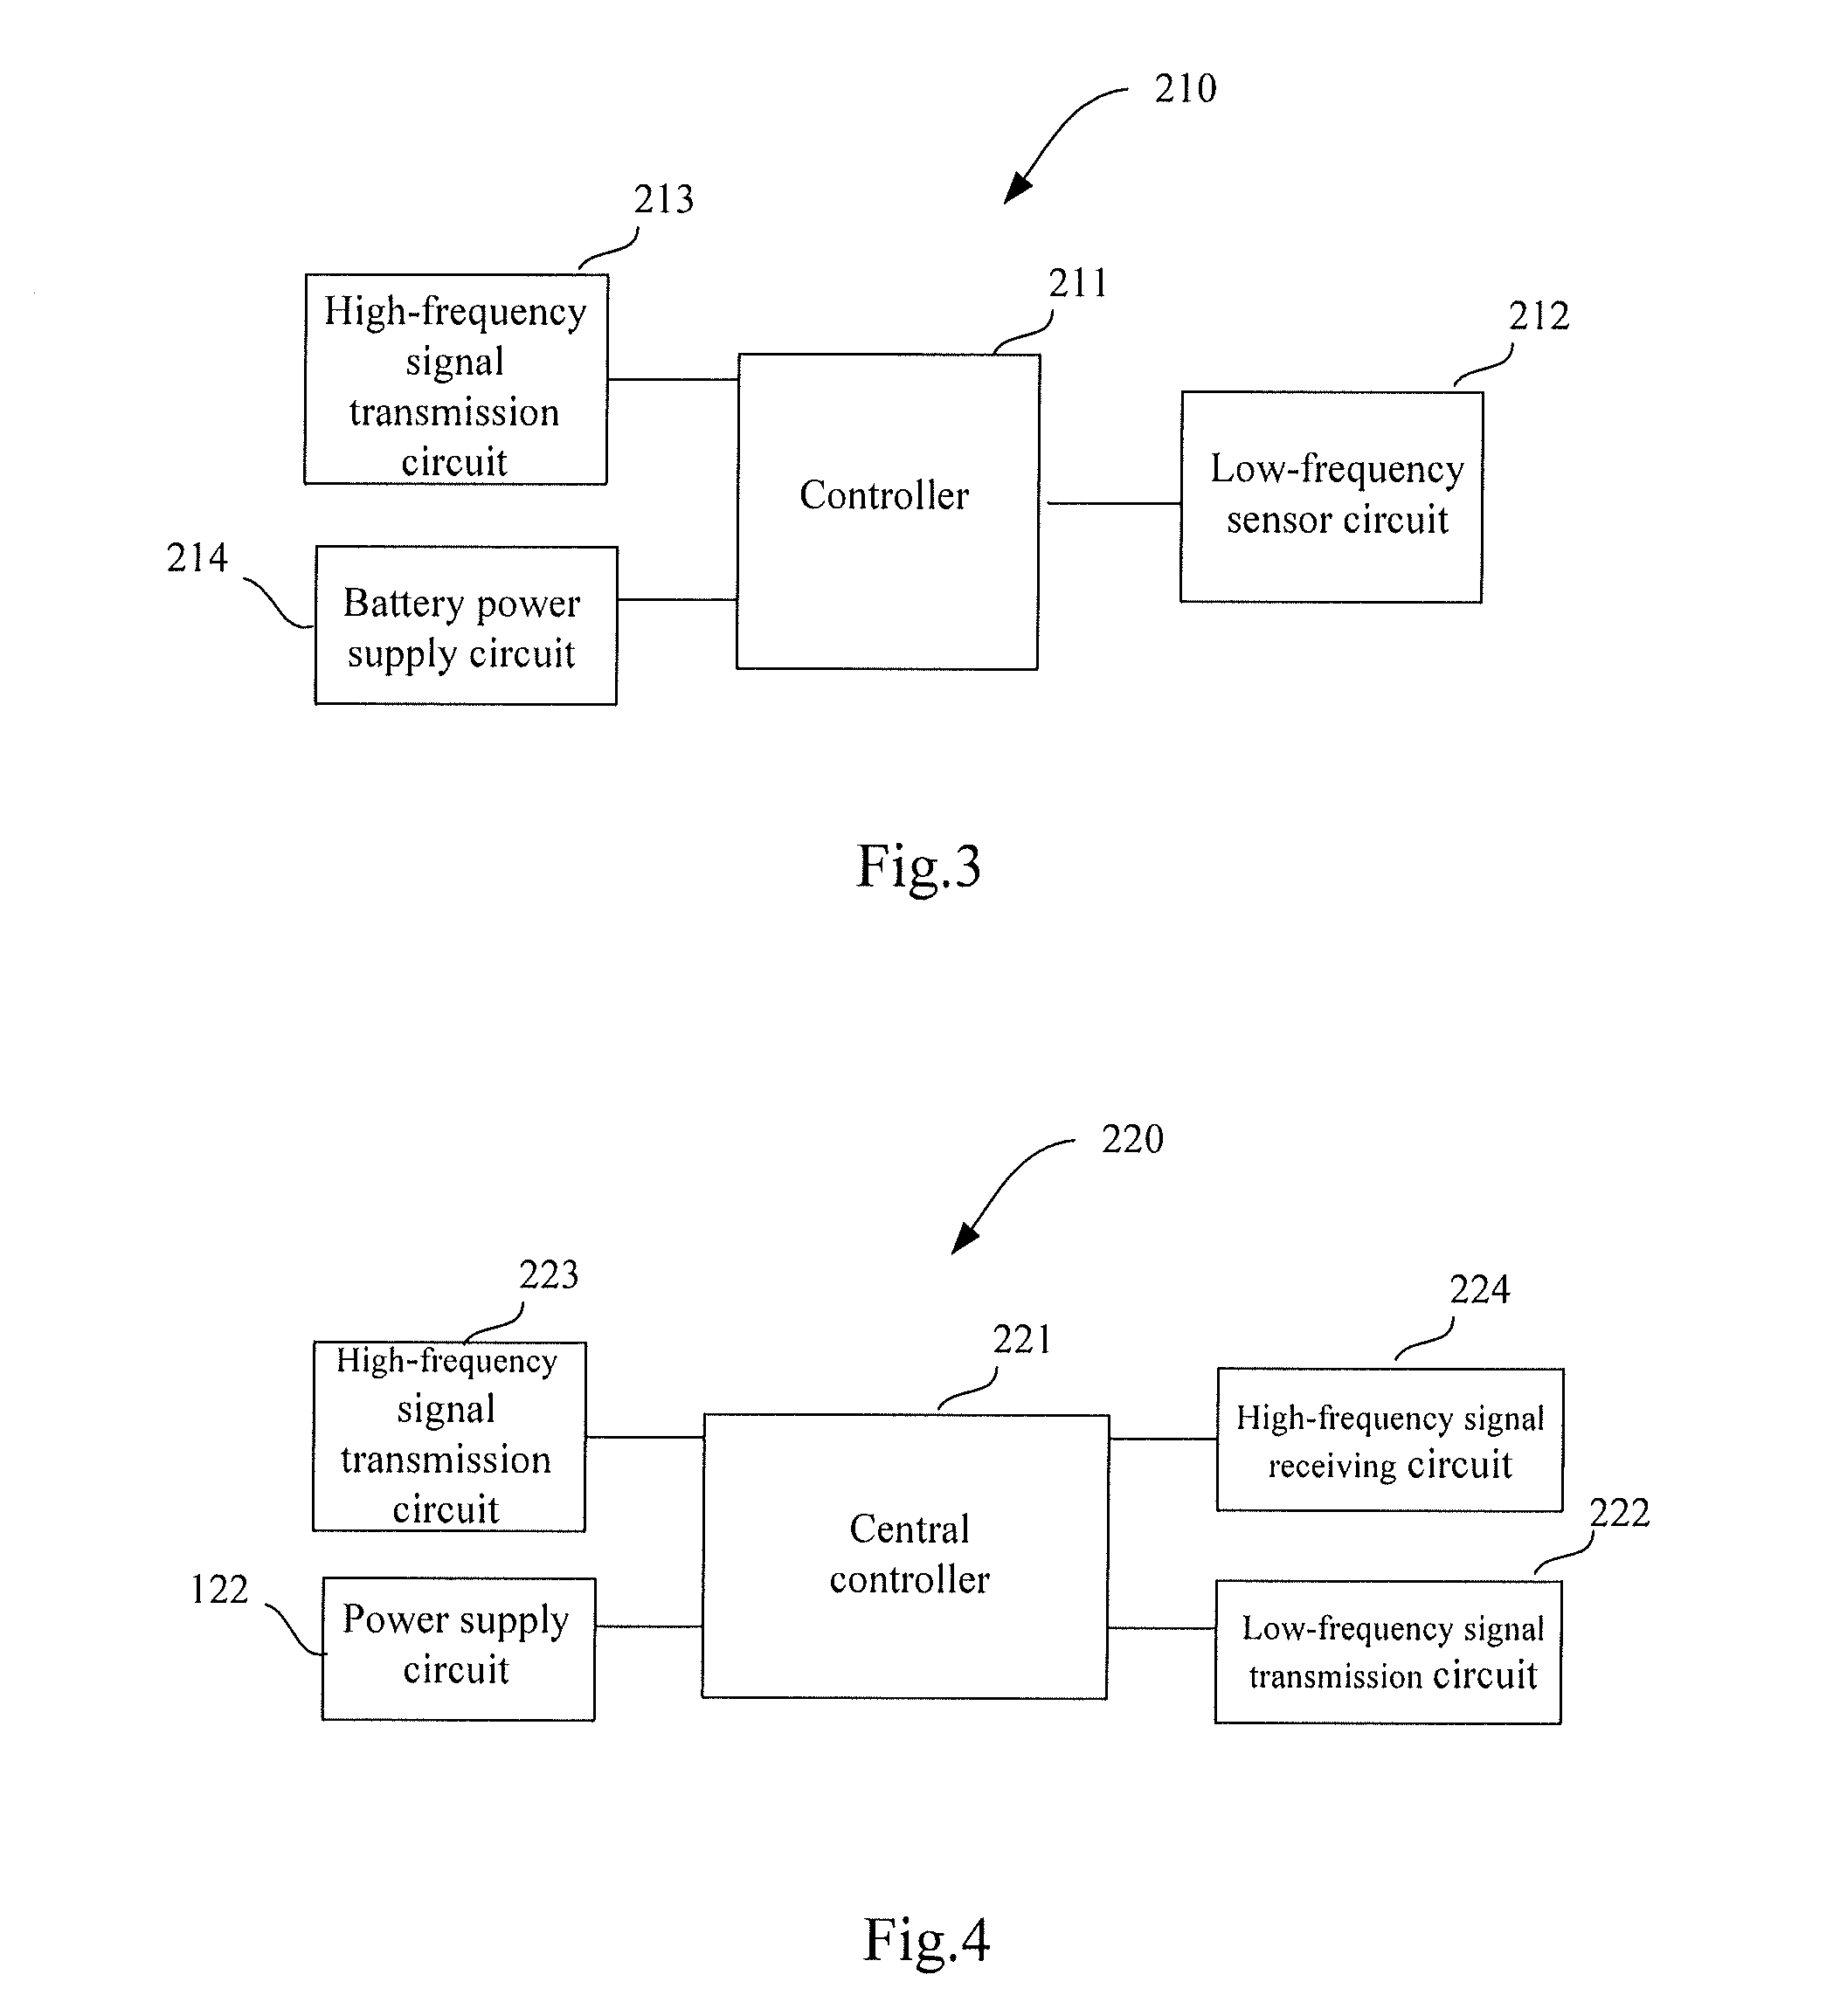 Automatic networking apparatus for vehicles